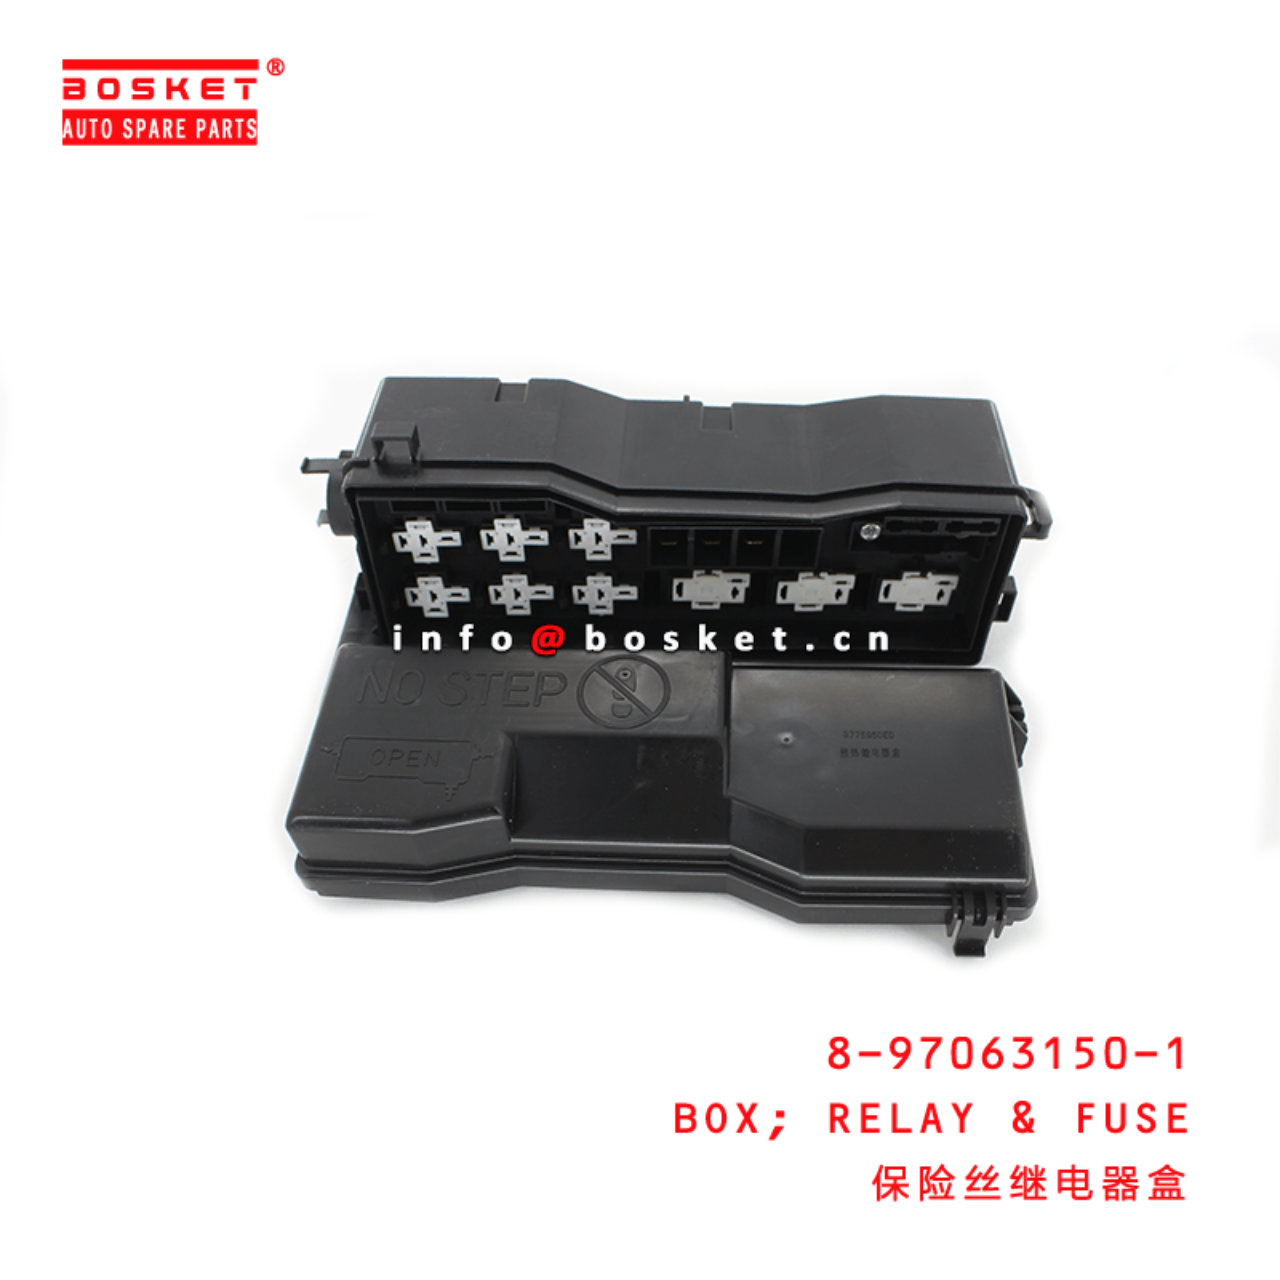 8-97063150-1 Relay & Fuse Box Suitable for ISUZU NKR77 4JH1 8970631501